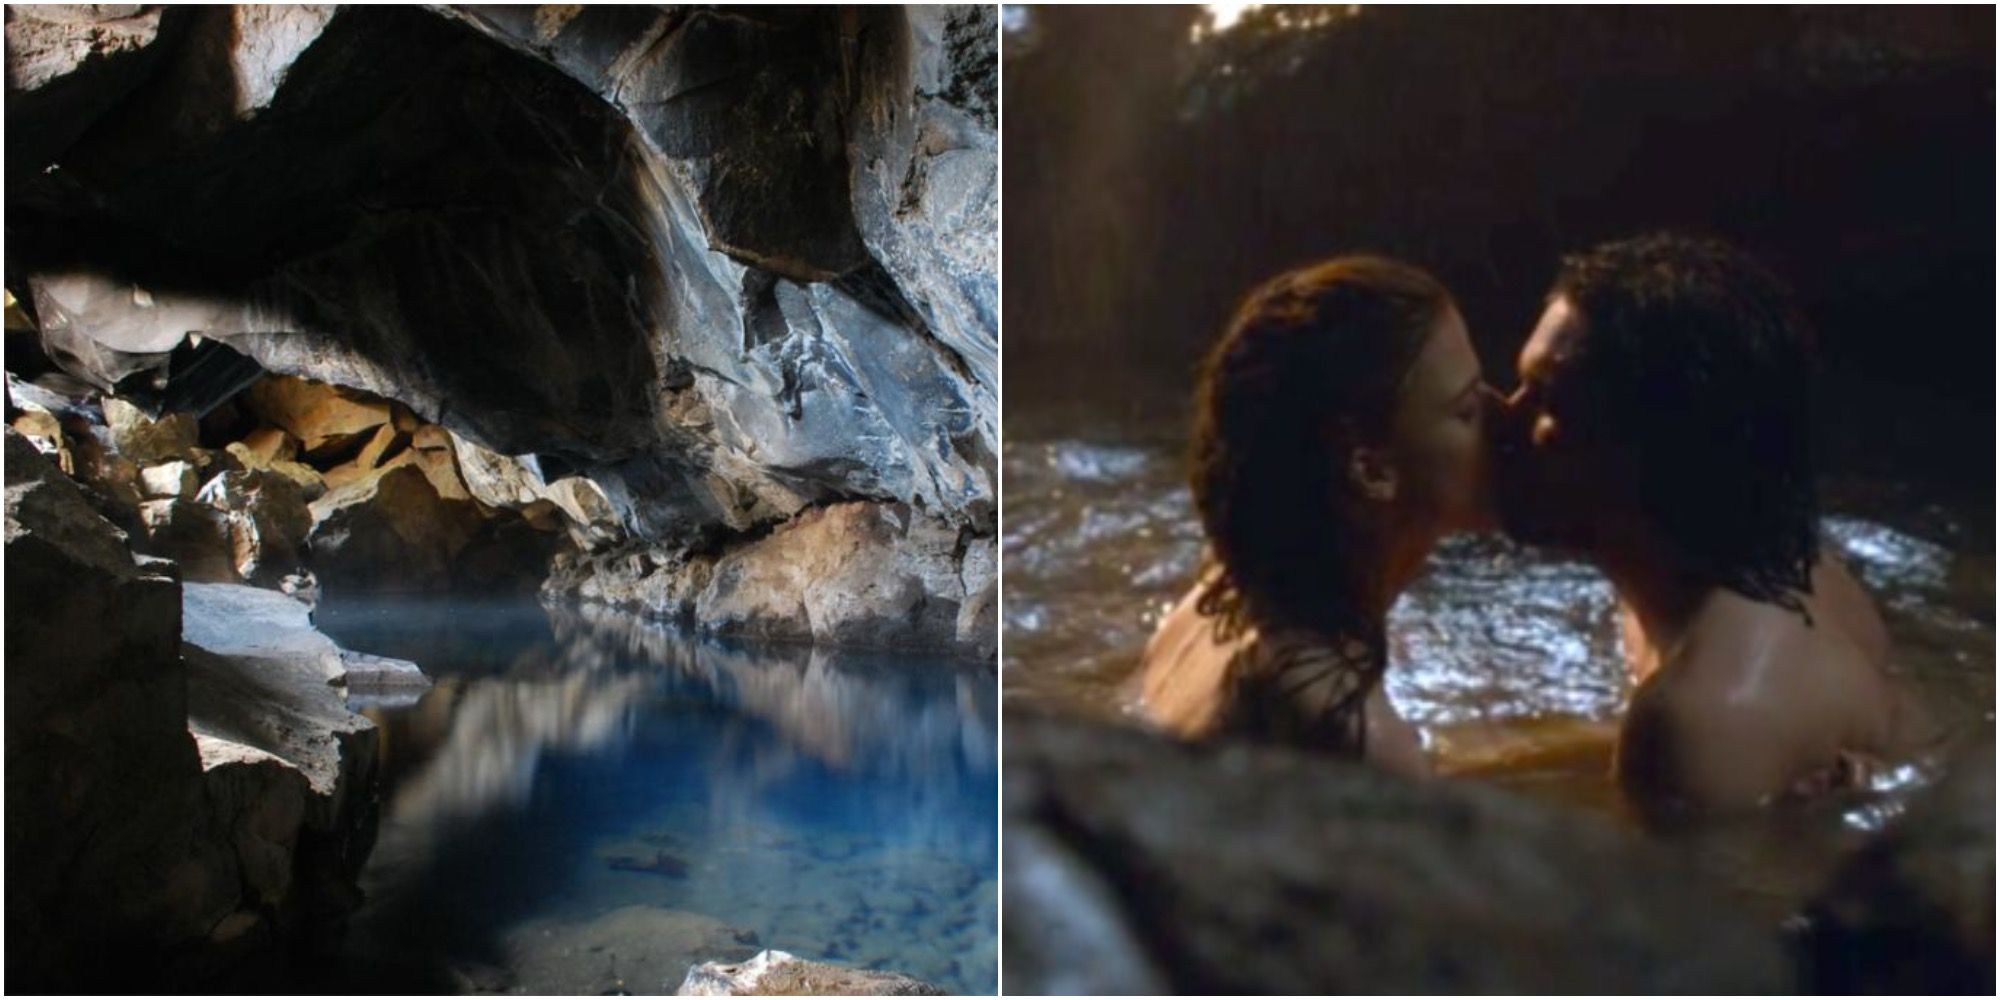 Game of Thrones Collage of Filming Locations Jon & Ygritte's Cave in Iceland